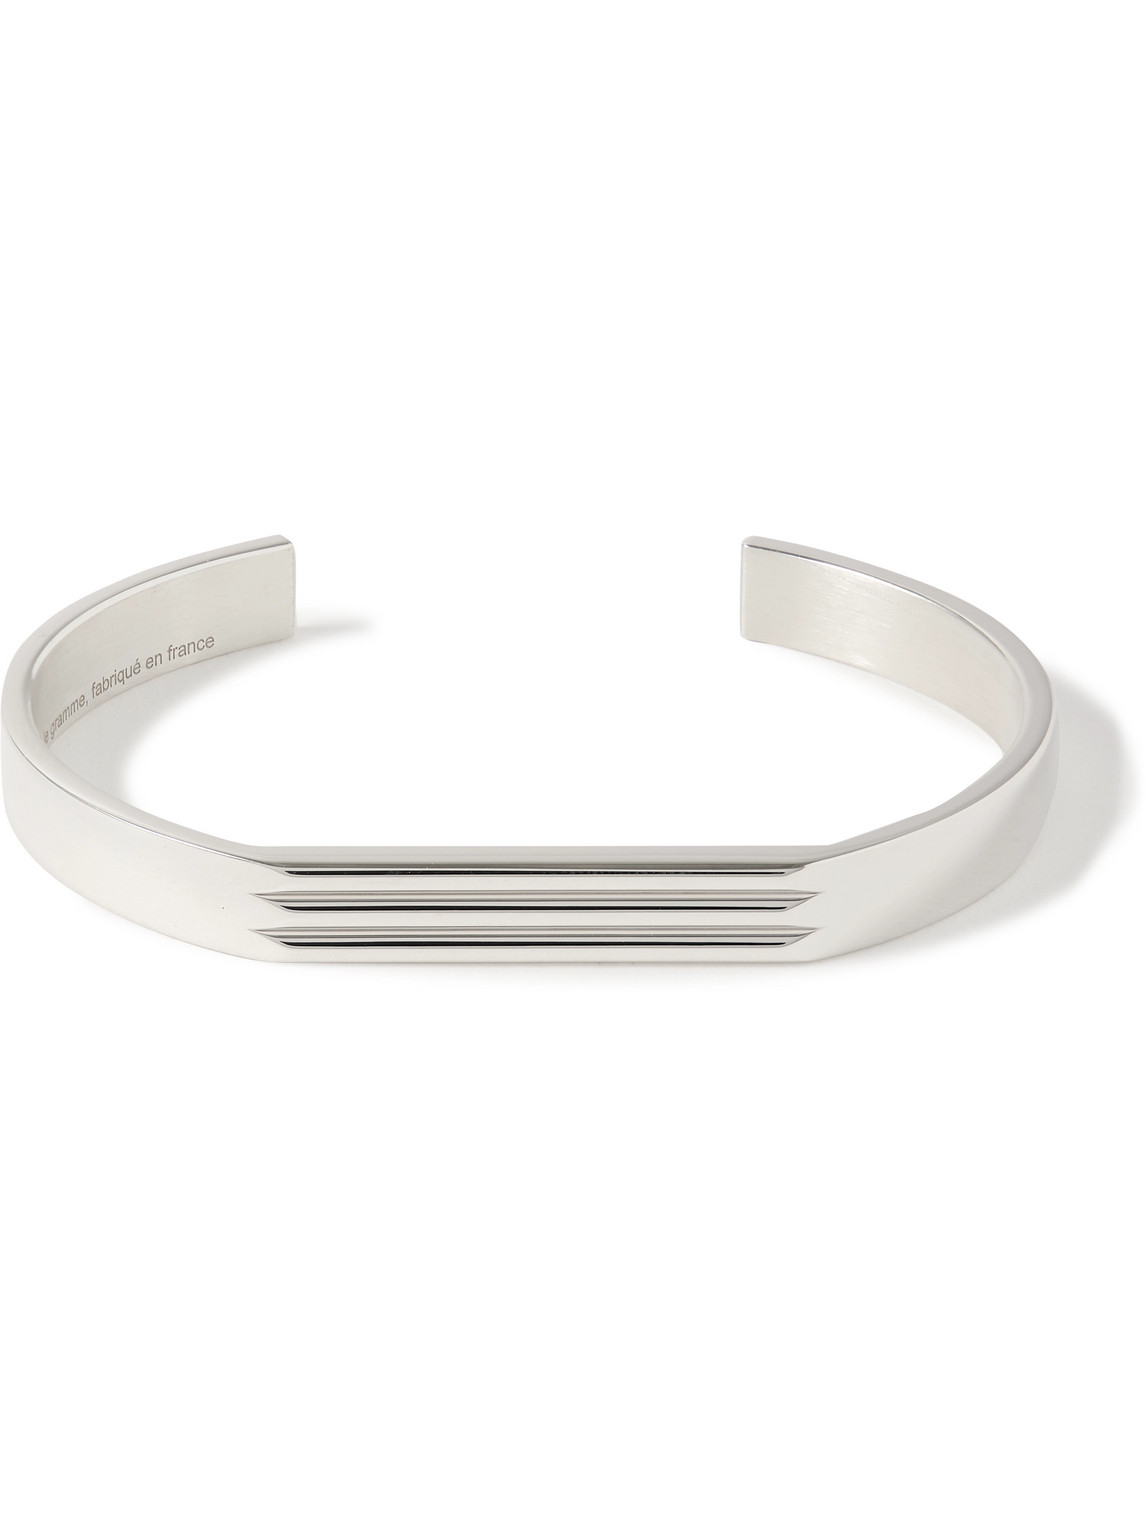 Le Gramme Godron 21g Recycled Sterling Silver Cuff